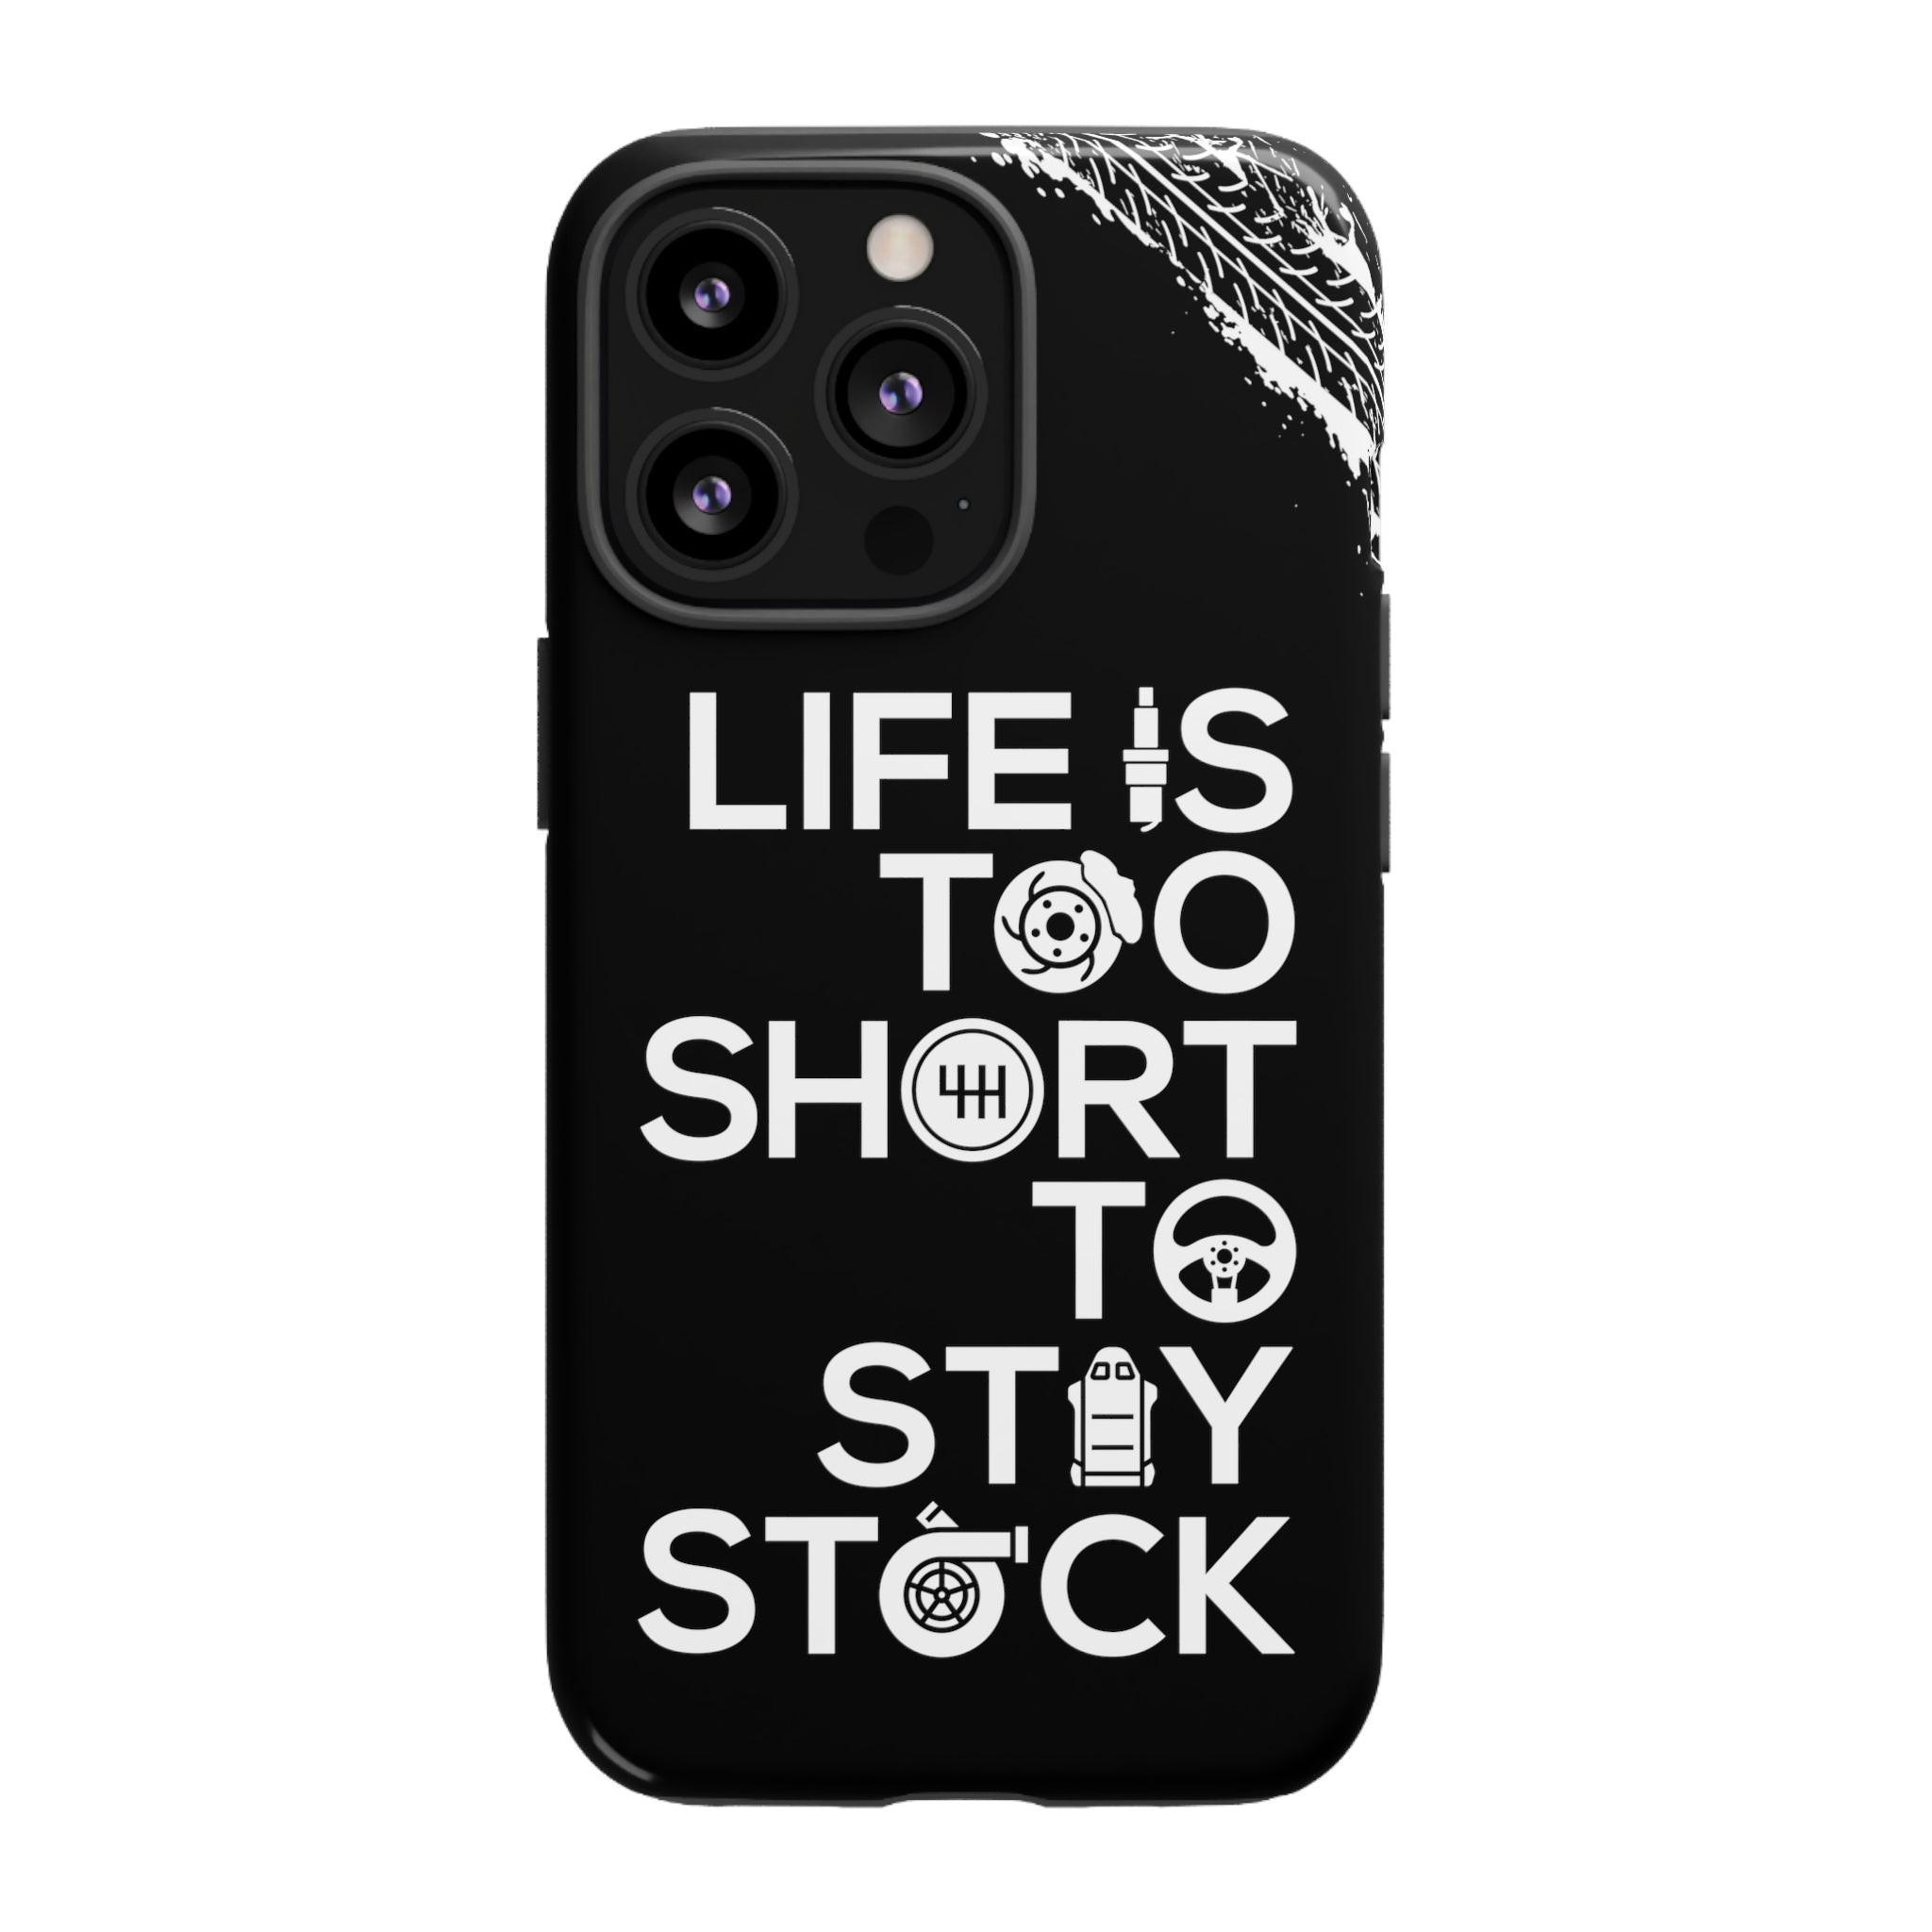 Life Too Short To Stay Stock - Phone Case